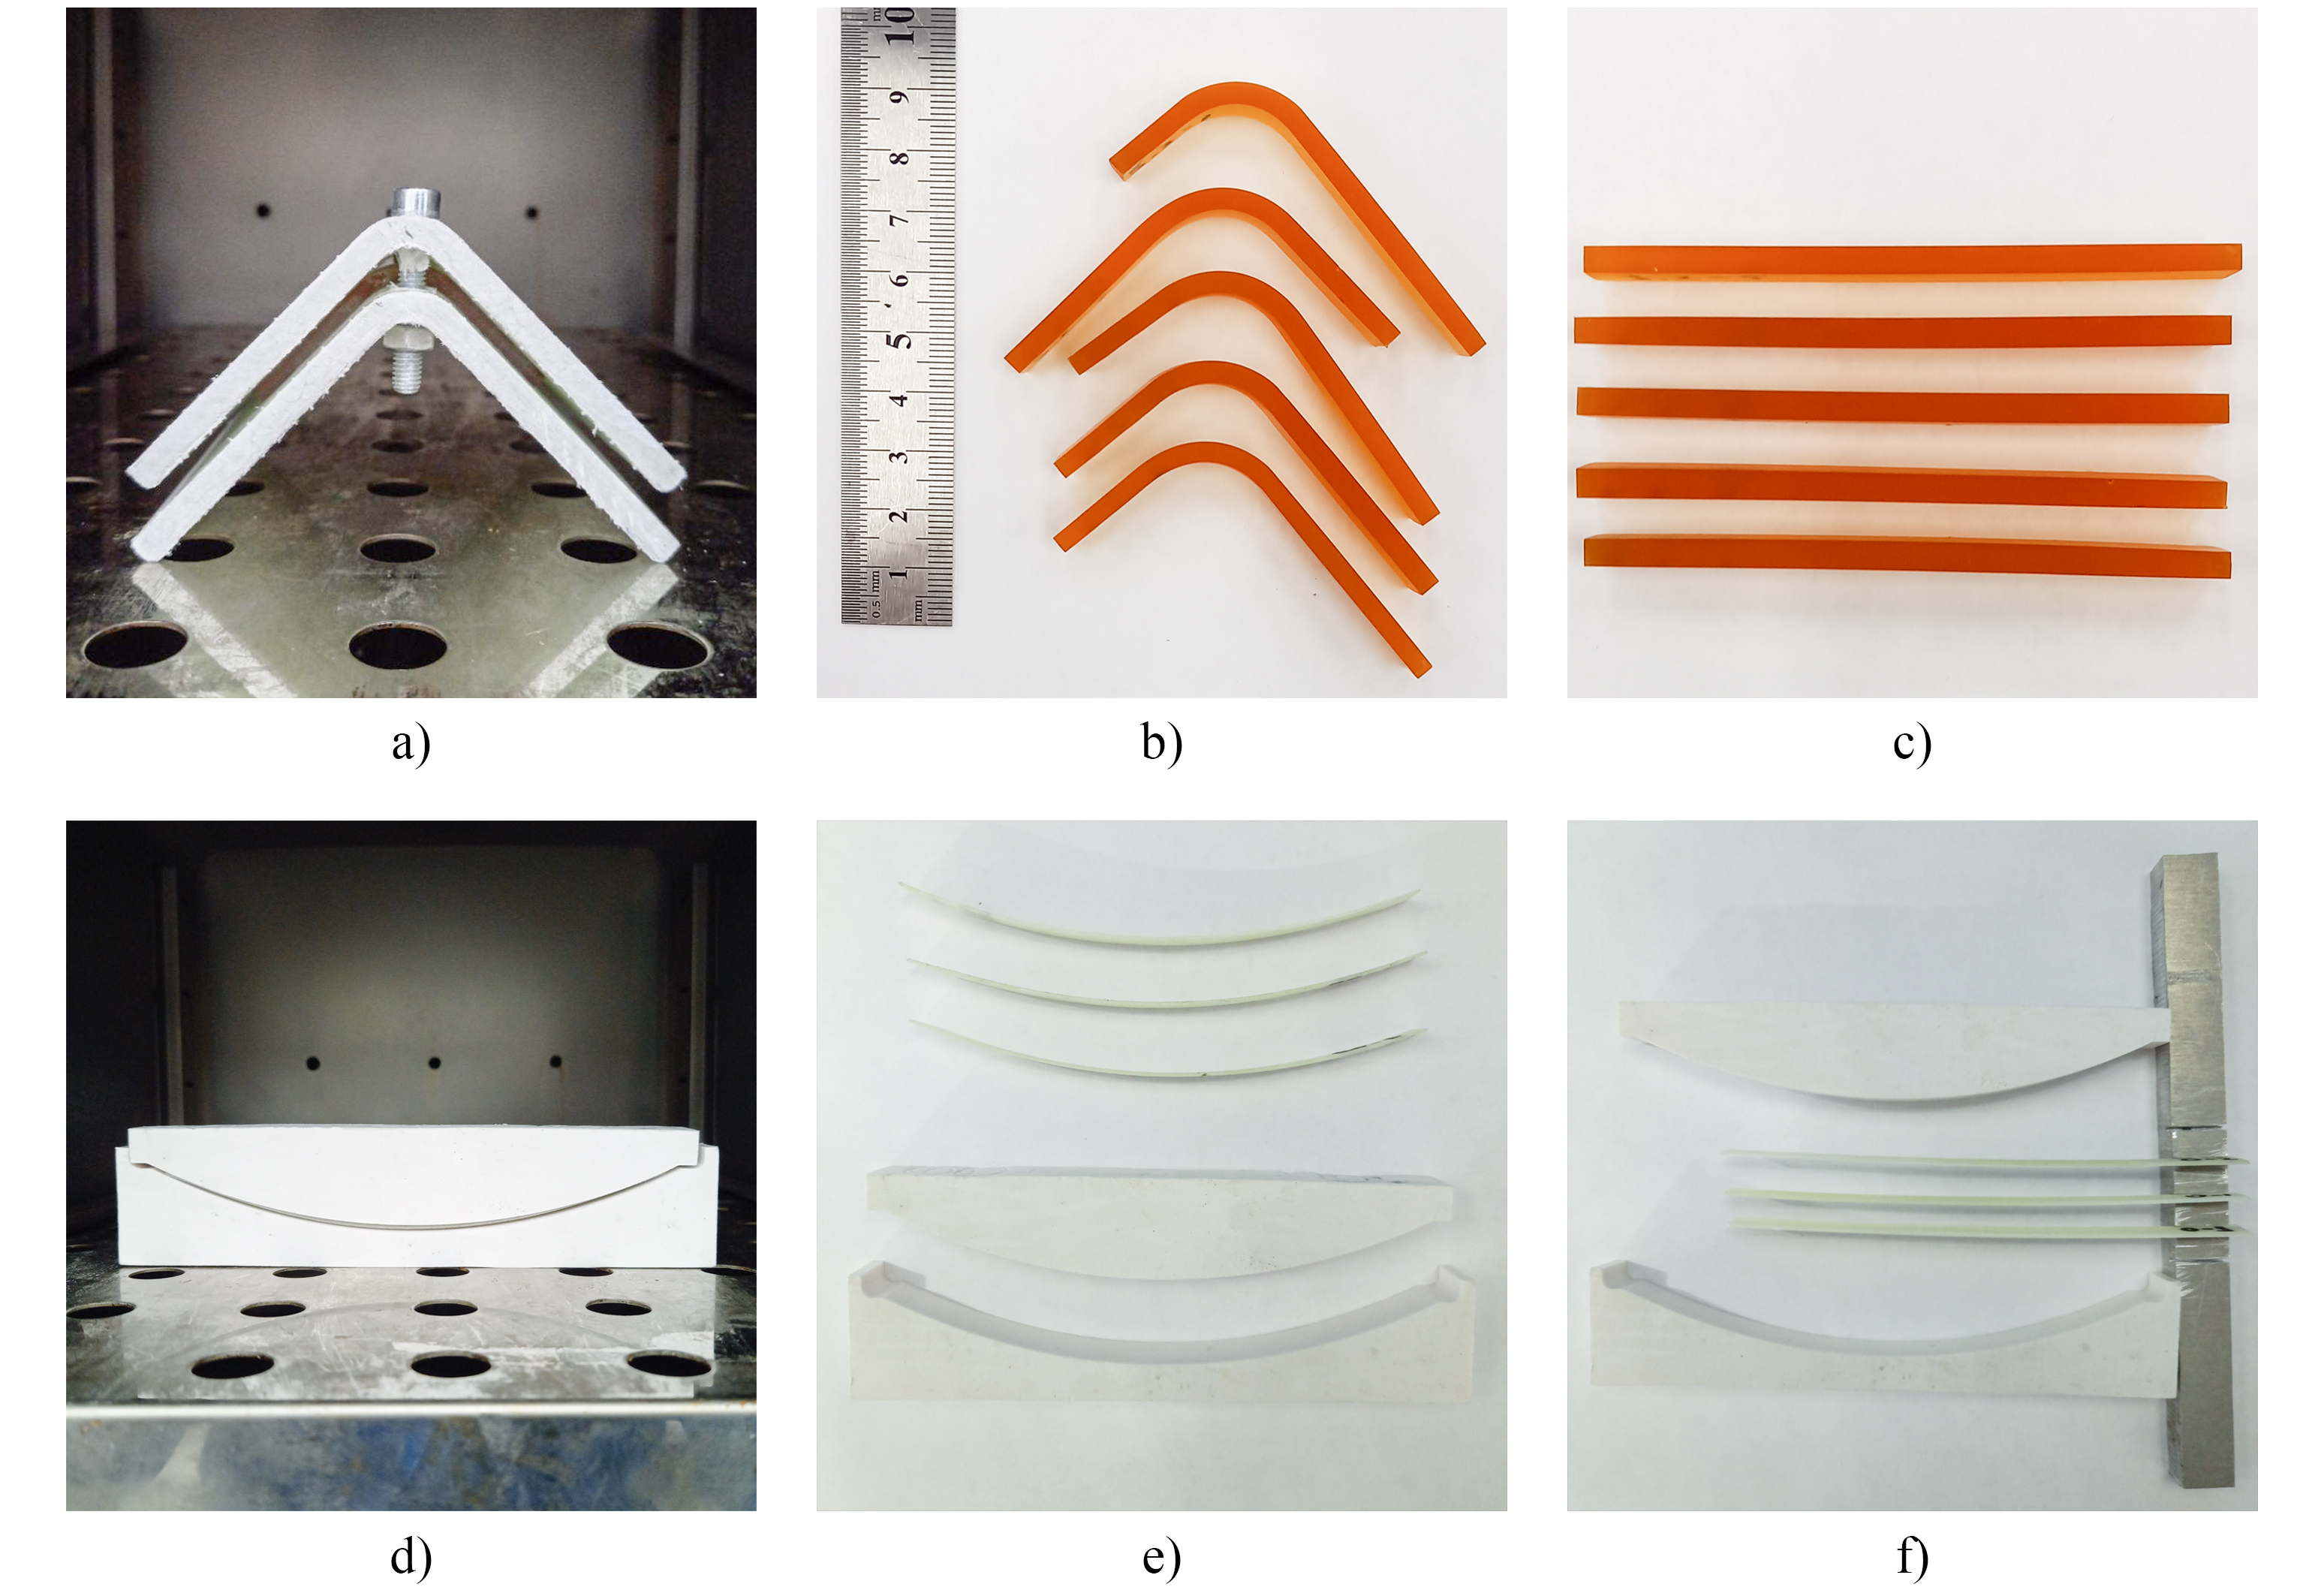 Shape memory testing of cured resin and pultruded composite specimens: (a) Deformed specimen of cured resin in the test fixture after heating; (b) cured resin specimens after shape fixing; (c) cured res-in specimens after shape recovery; (d) deformed specimen of pultruded composite in the test fixture after heating; (e) geometry of pultruded composite specimen after shape fixing as compared to geometry of the test fixture; and (f) pultruded composite specimen after shape recovery. (Photo courte-sy Roman Korotkov et al.)